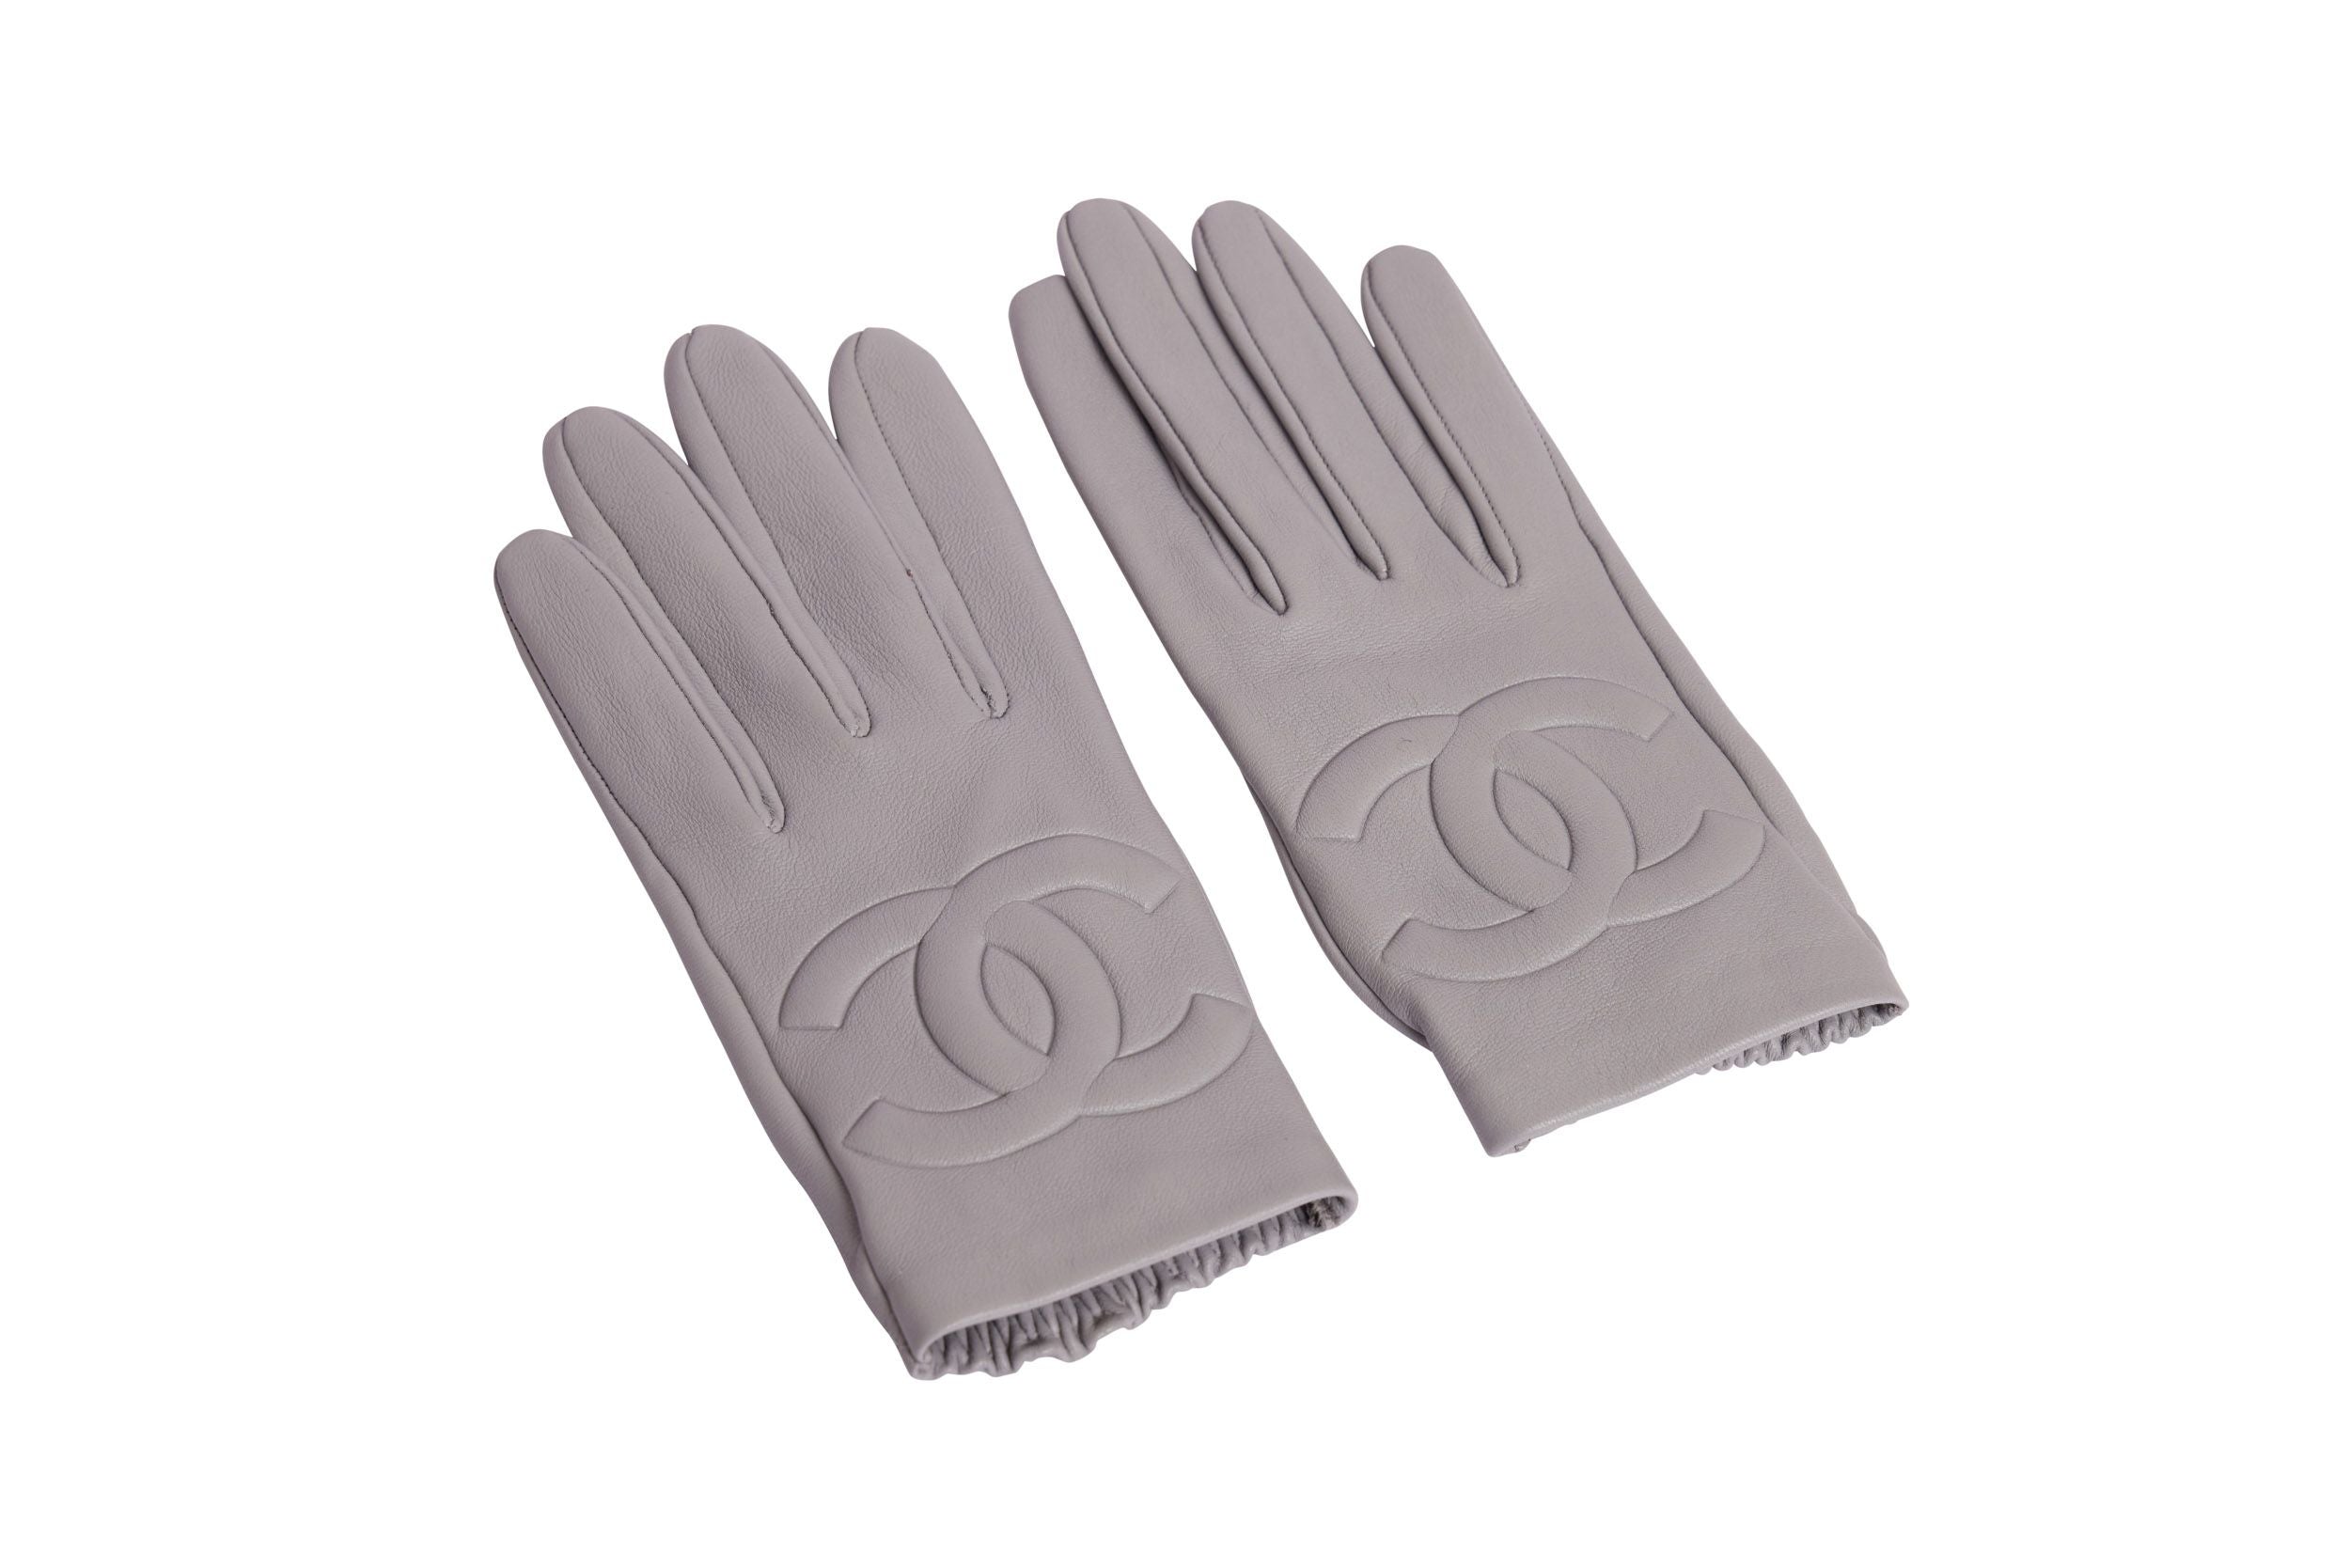 Chanel CC leather gloves